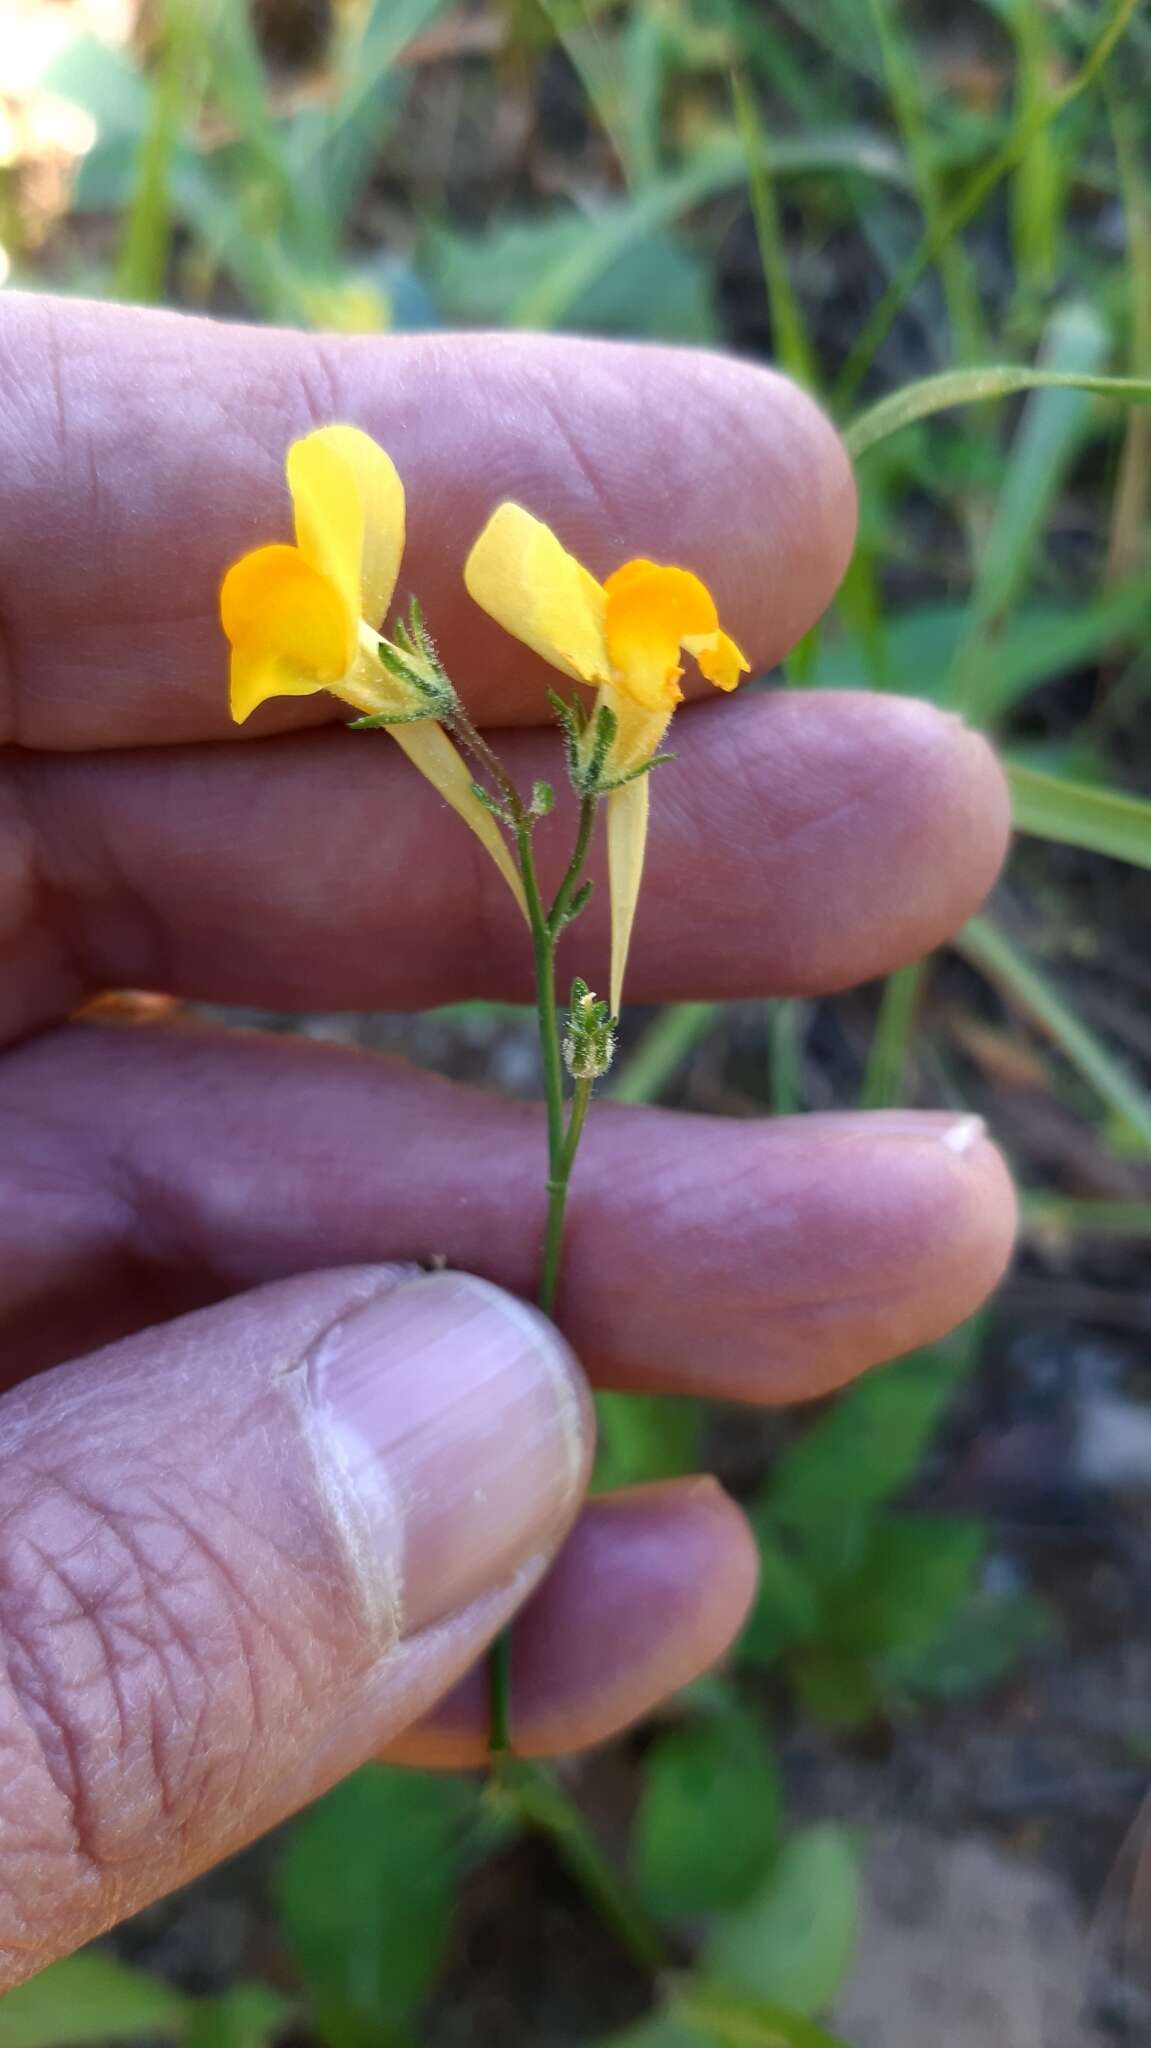 Image of ballast toadflax